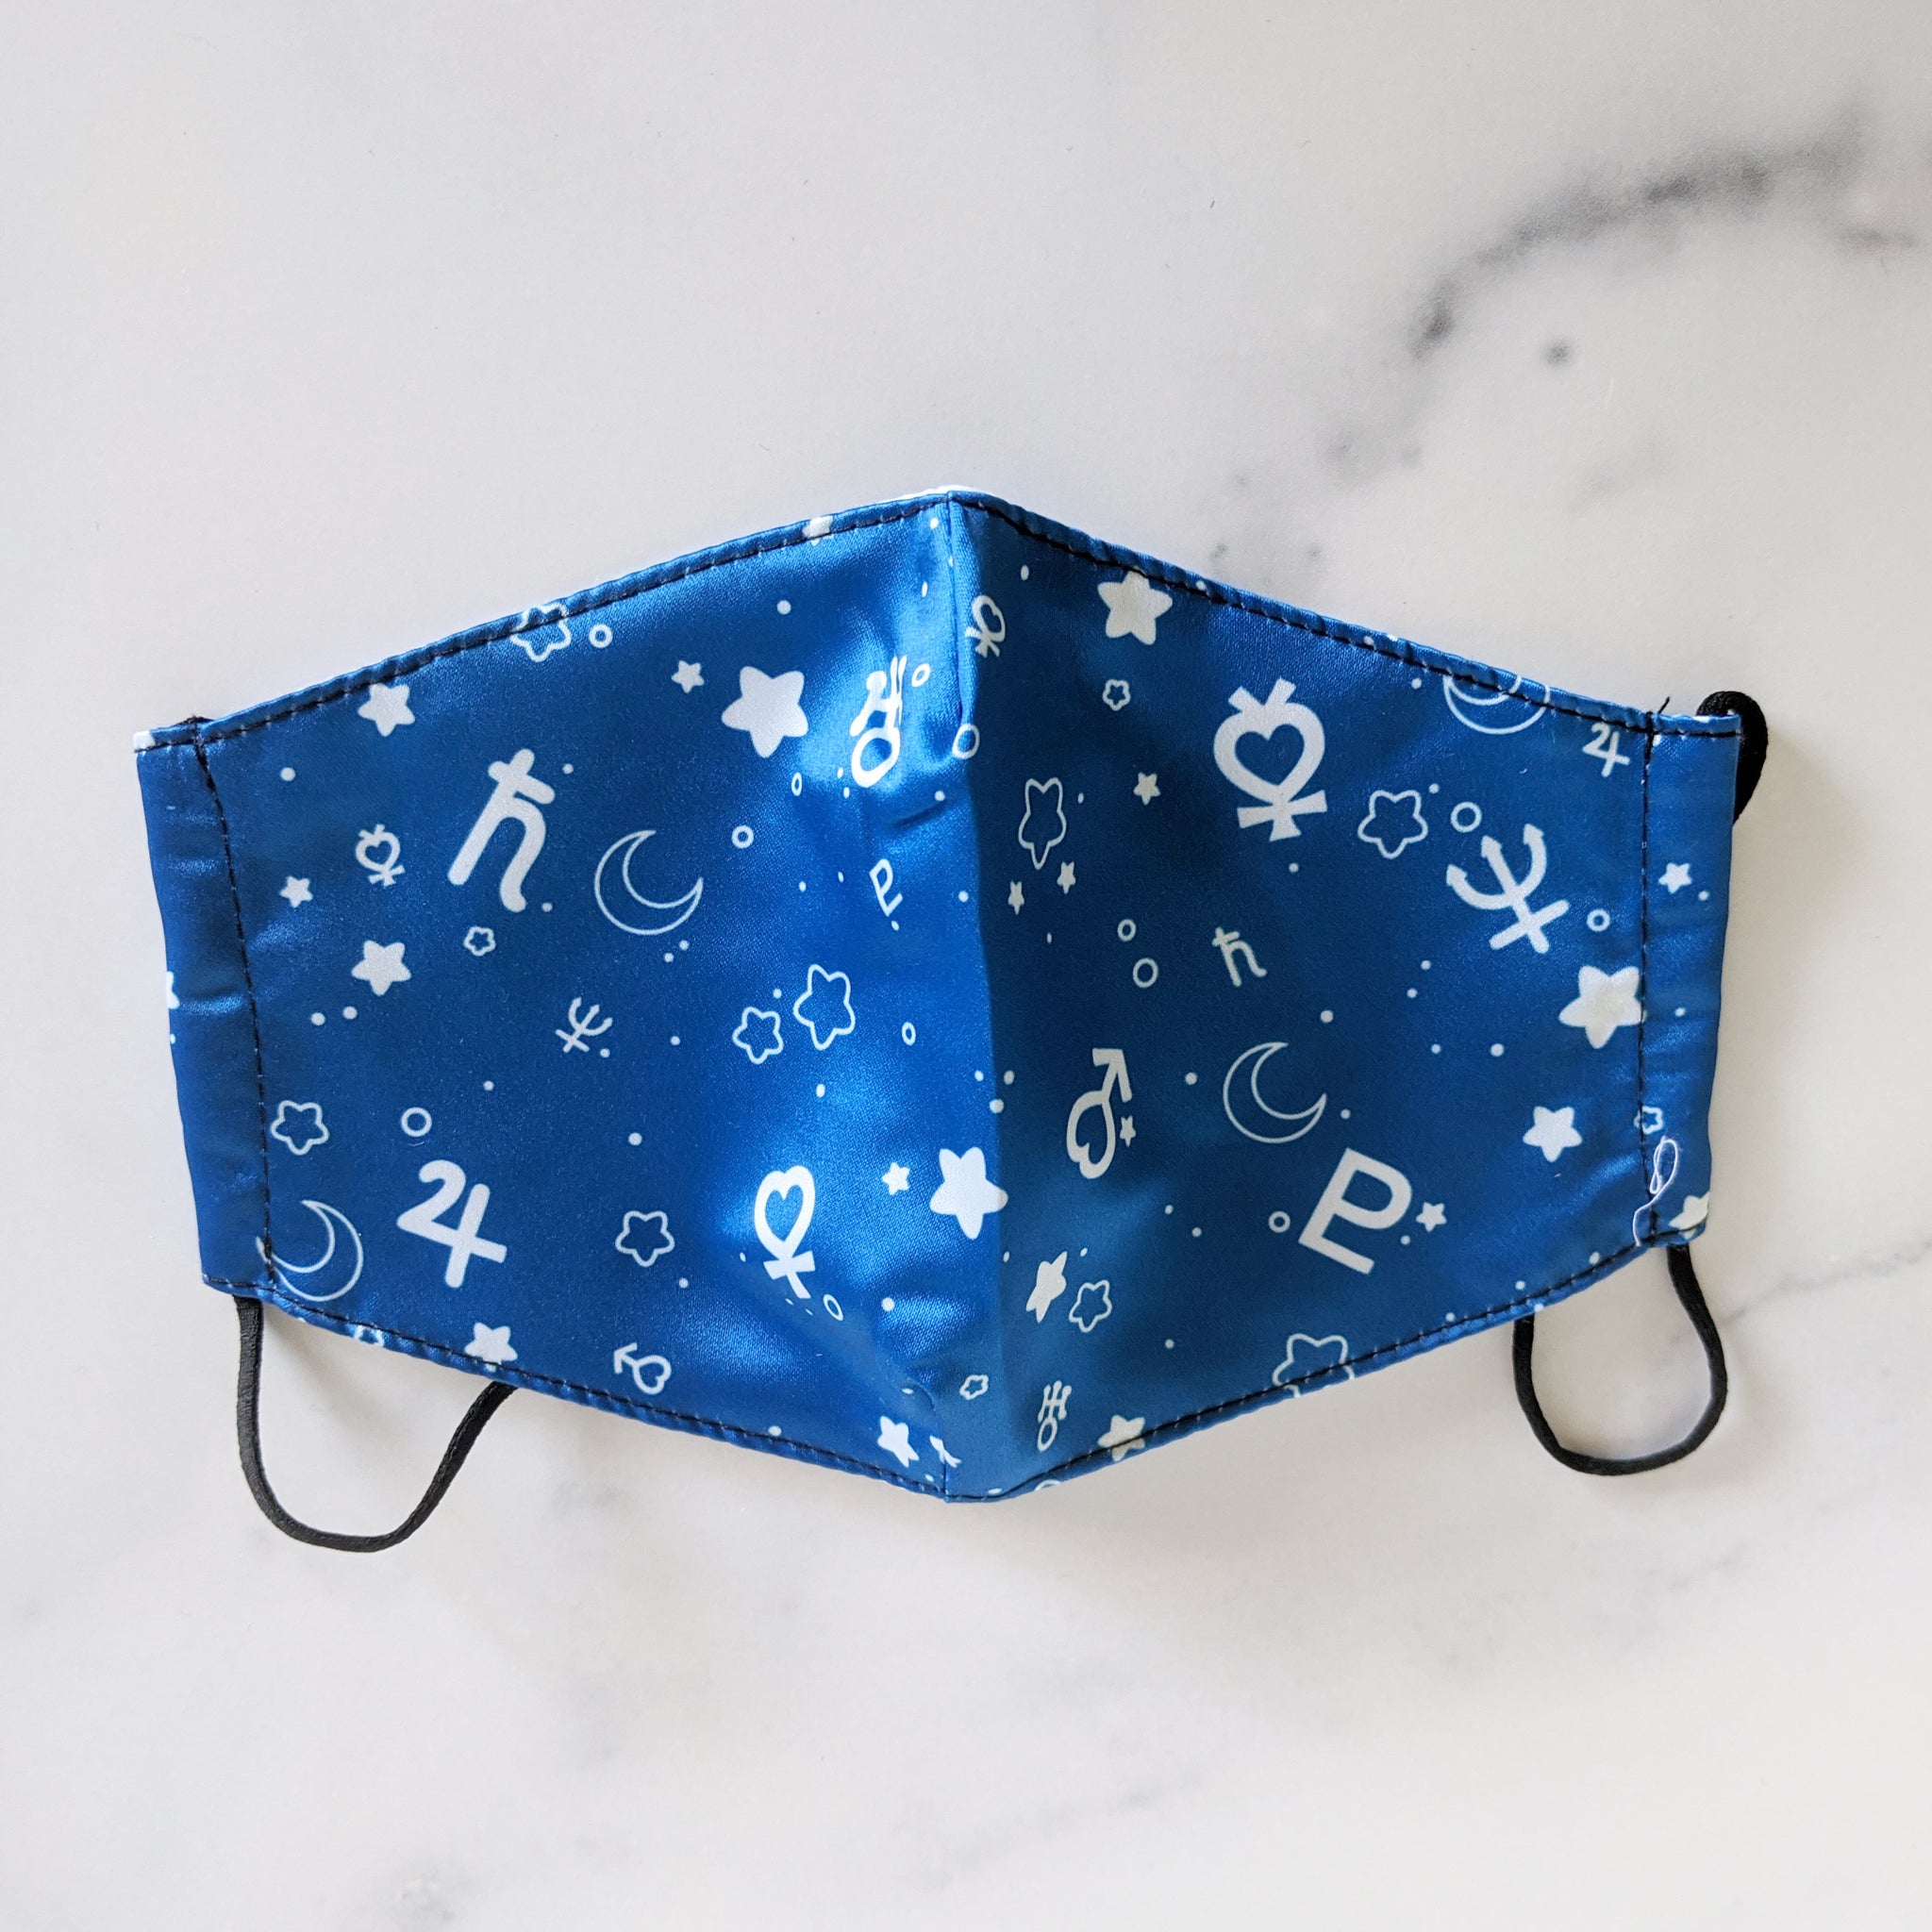 White/Blue Constellations and Symbols Anti-Dust Face Masks (Non-Medical) with Pocket and Charcoal Filter